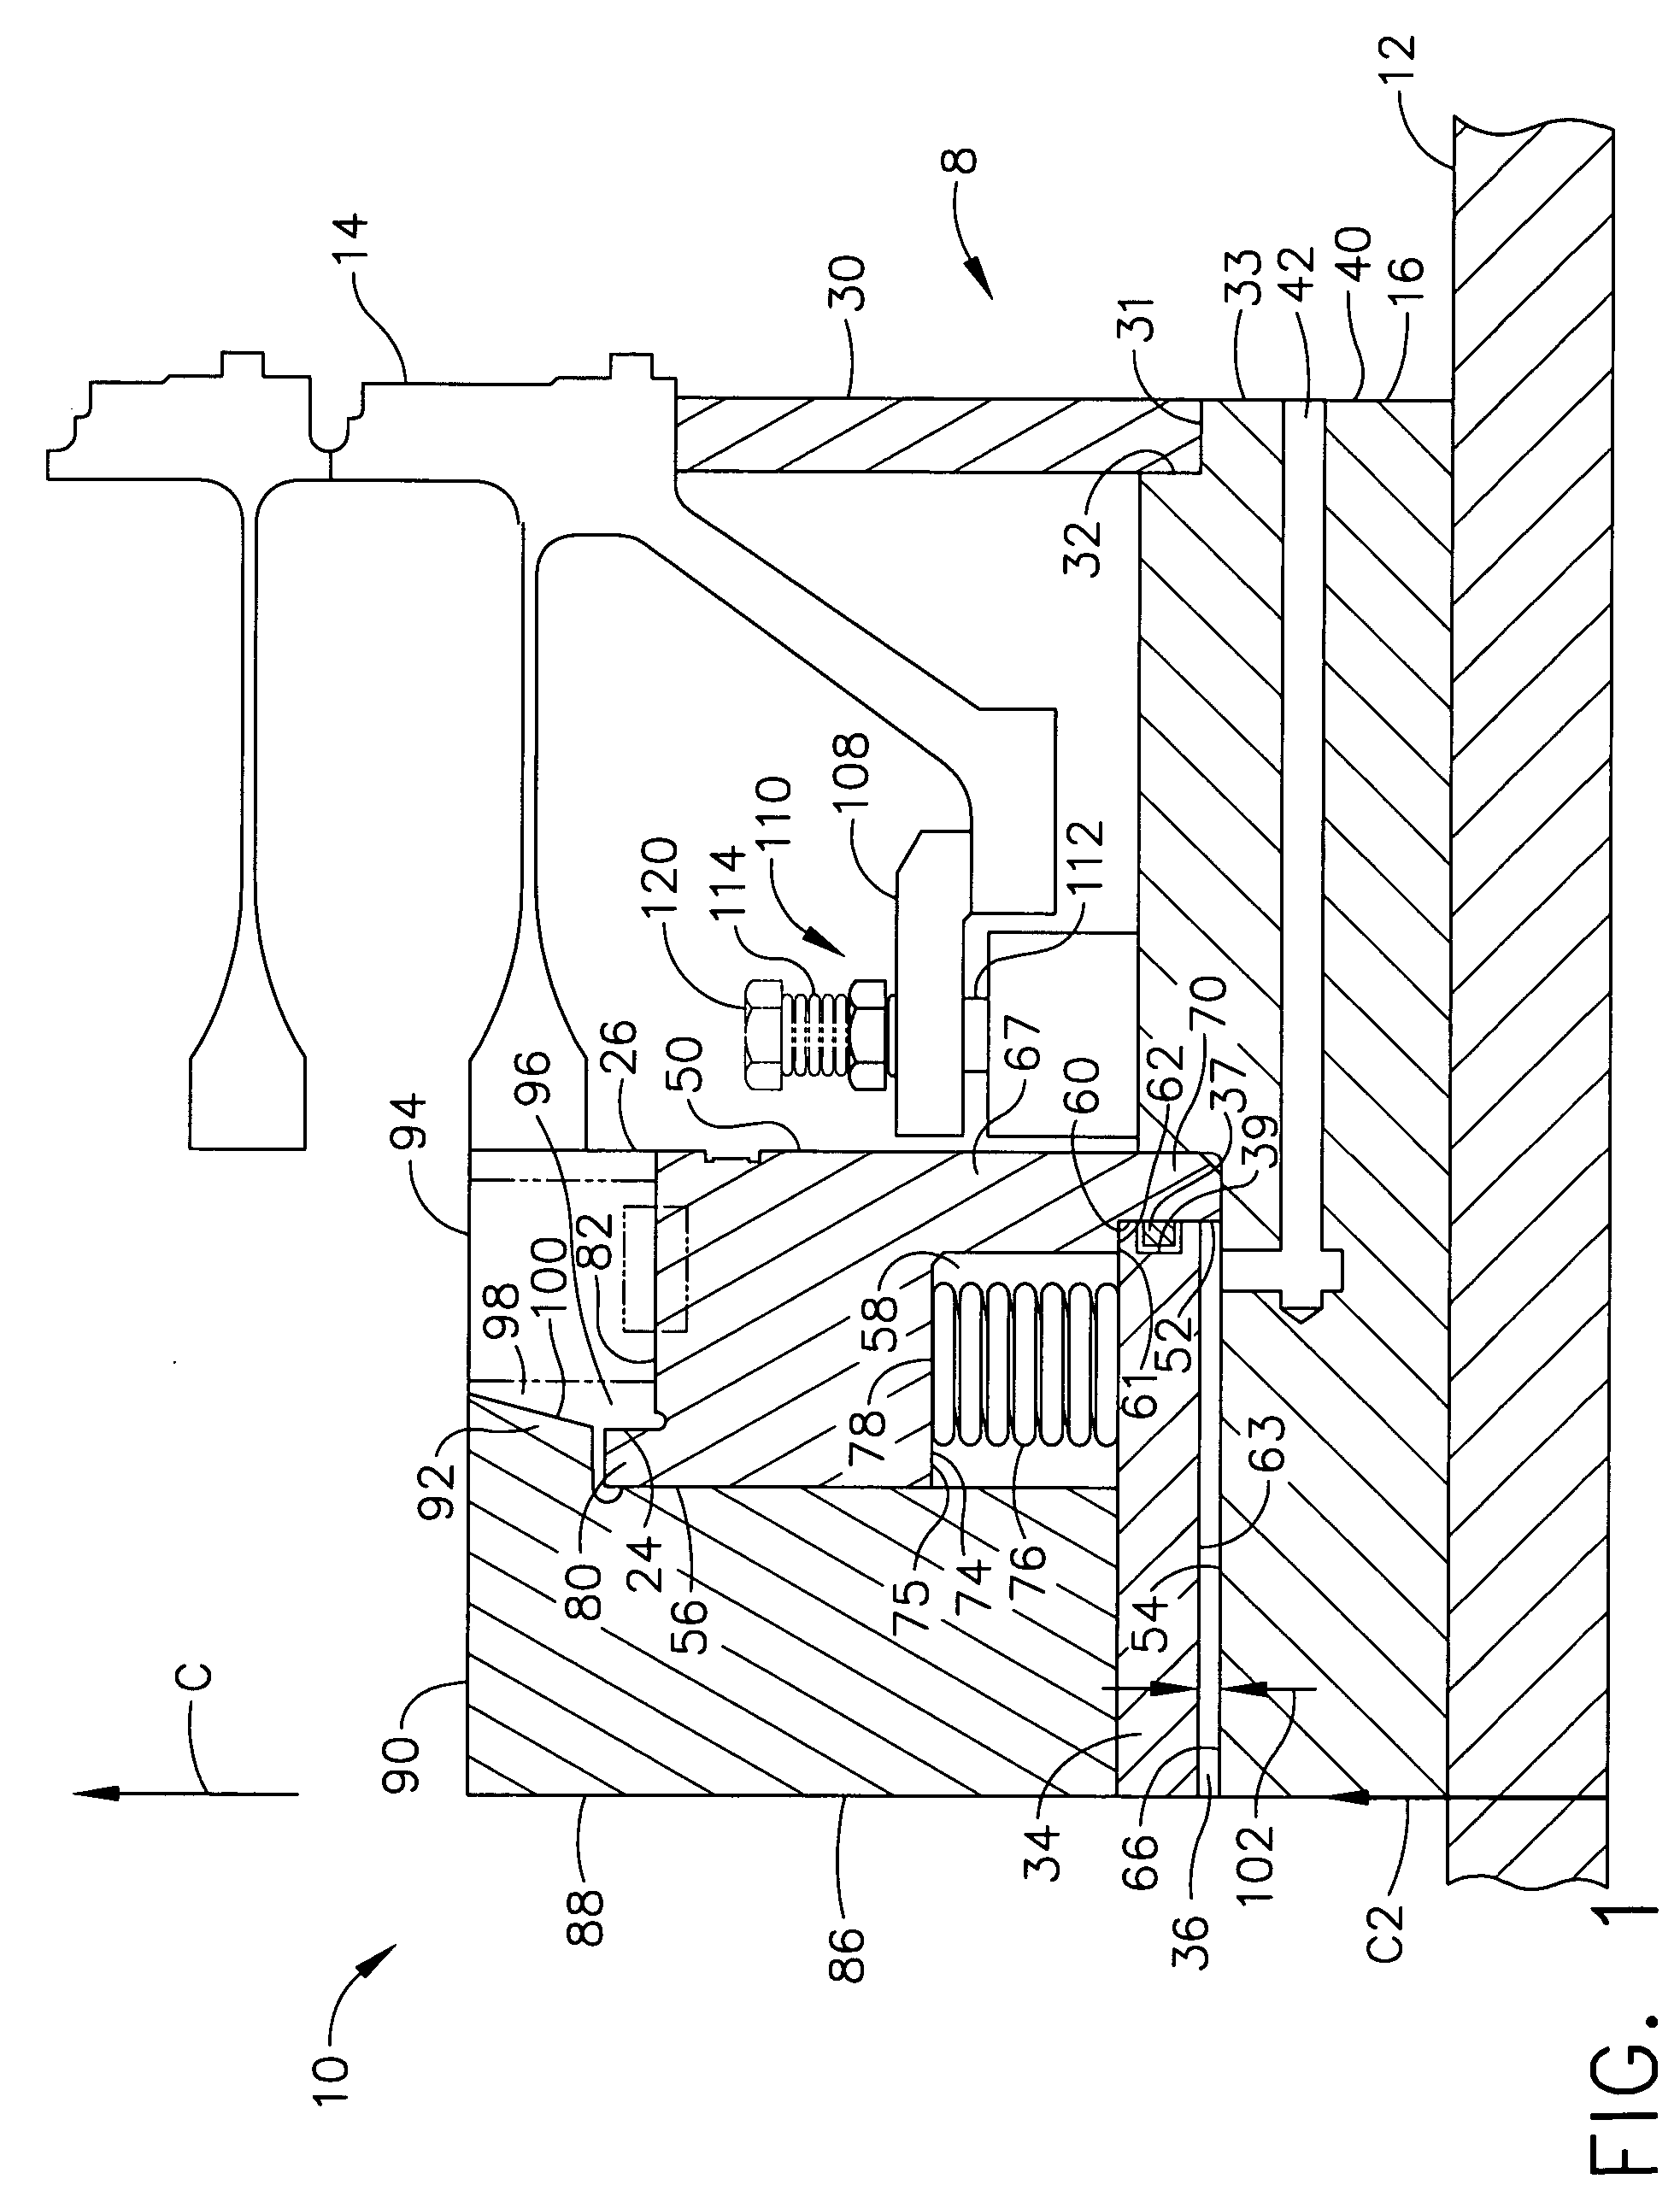 Machining fixture for centering and holding workpiece